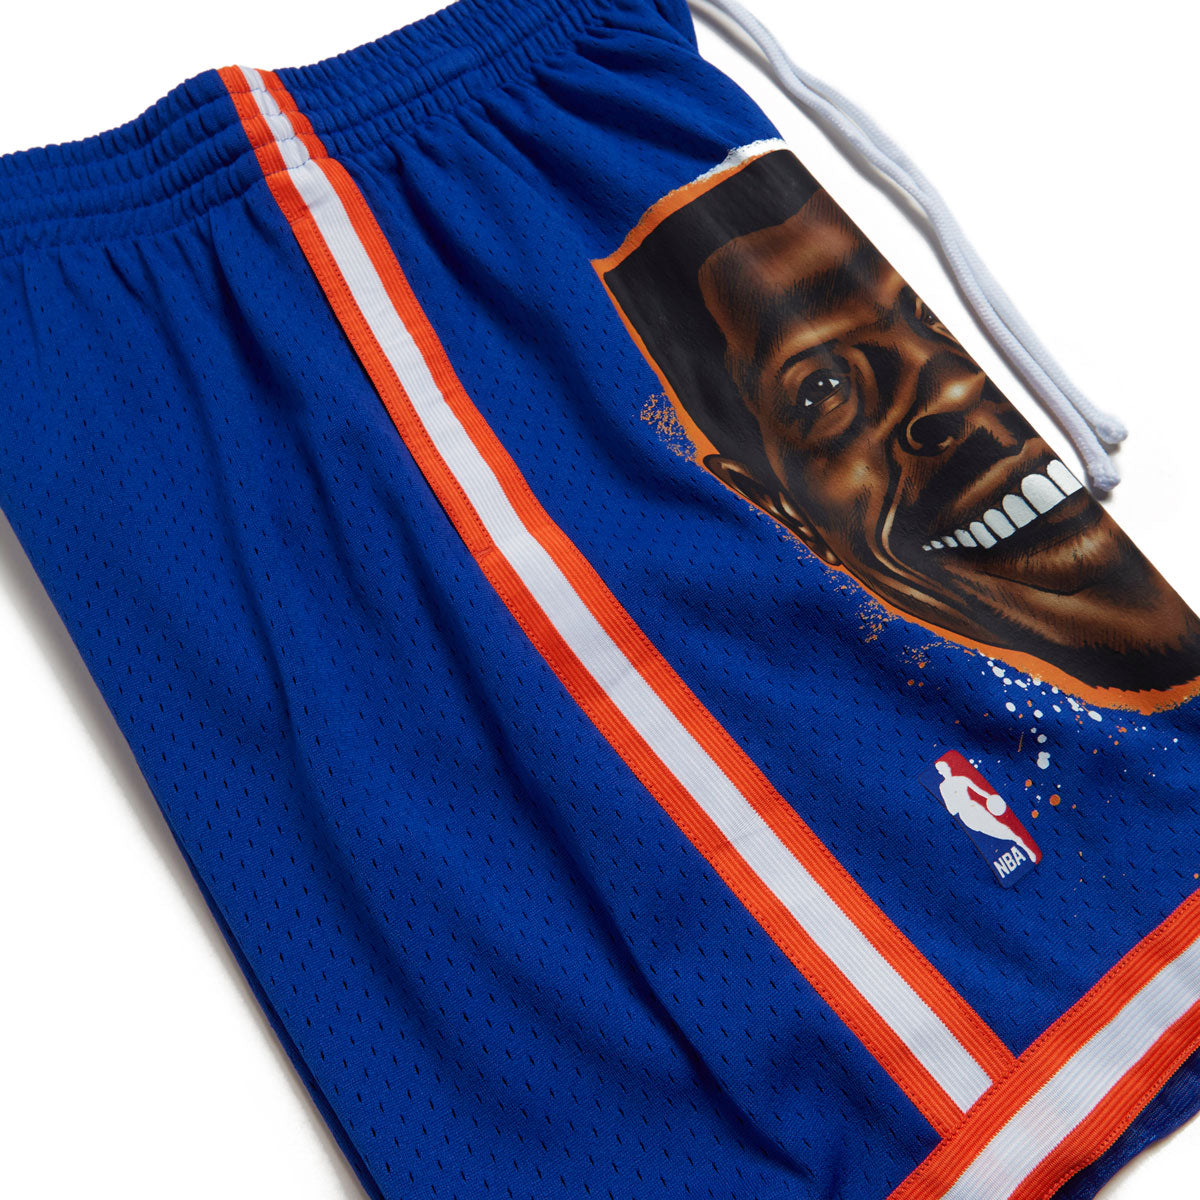 Mitchell & Ness All In One Knicks Shorts - Patrick Ewing image 3